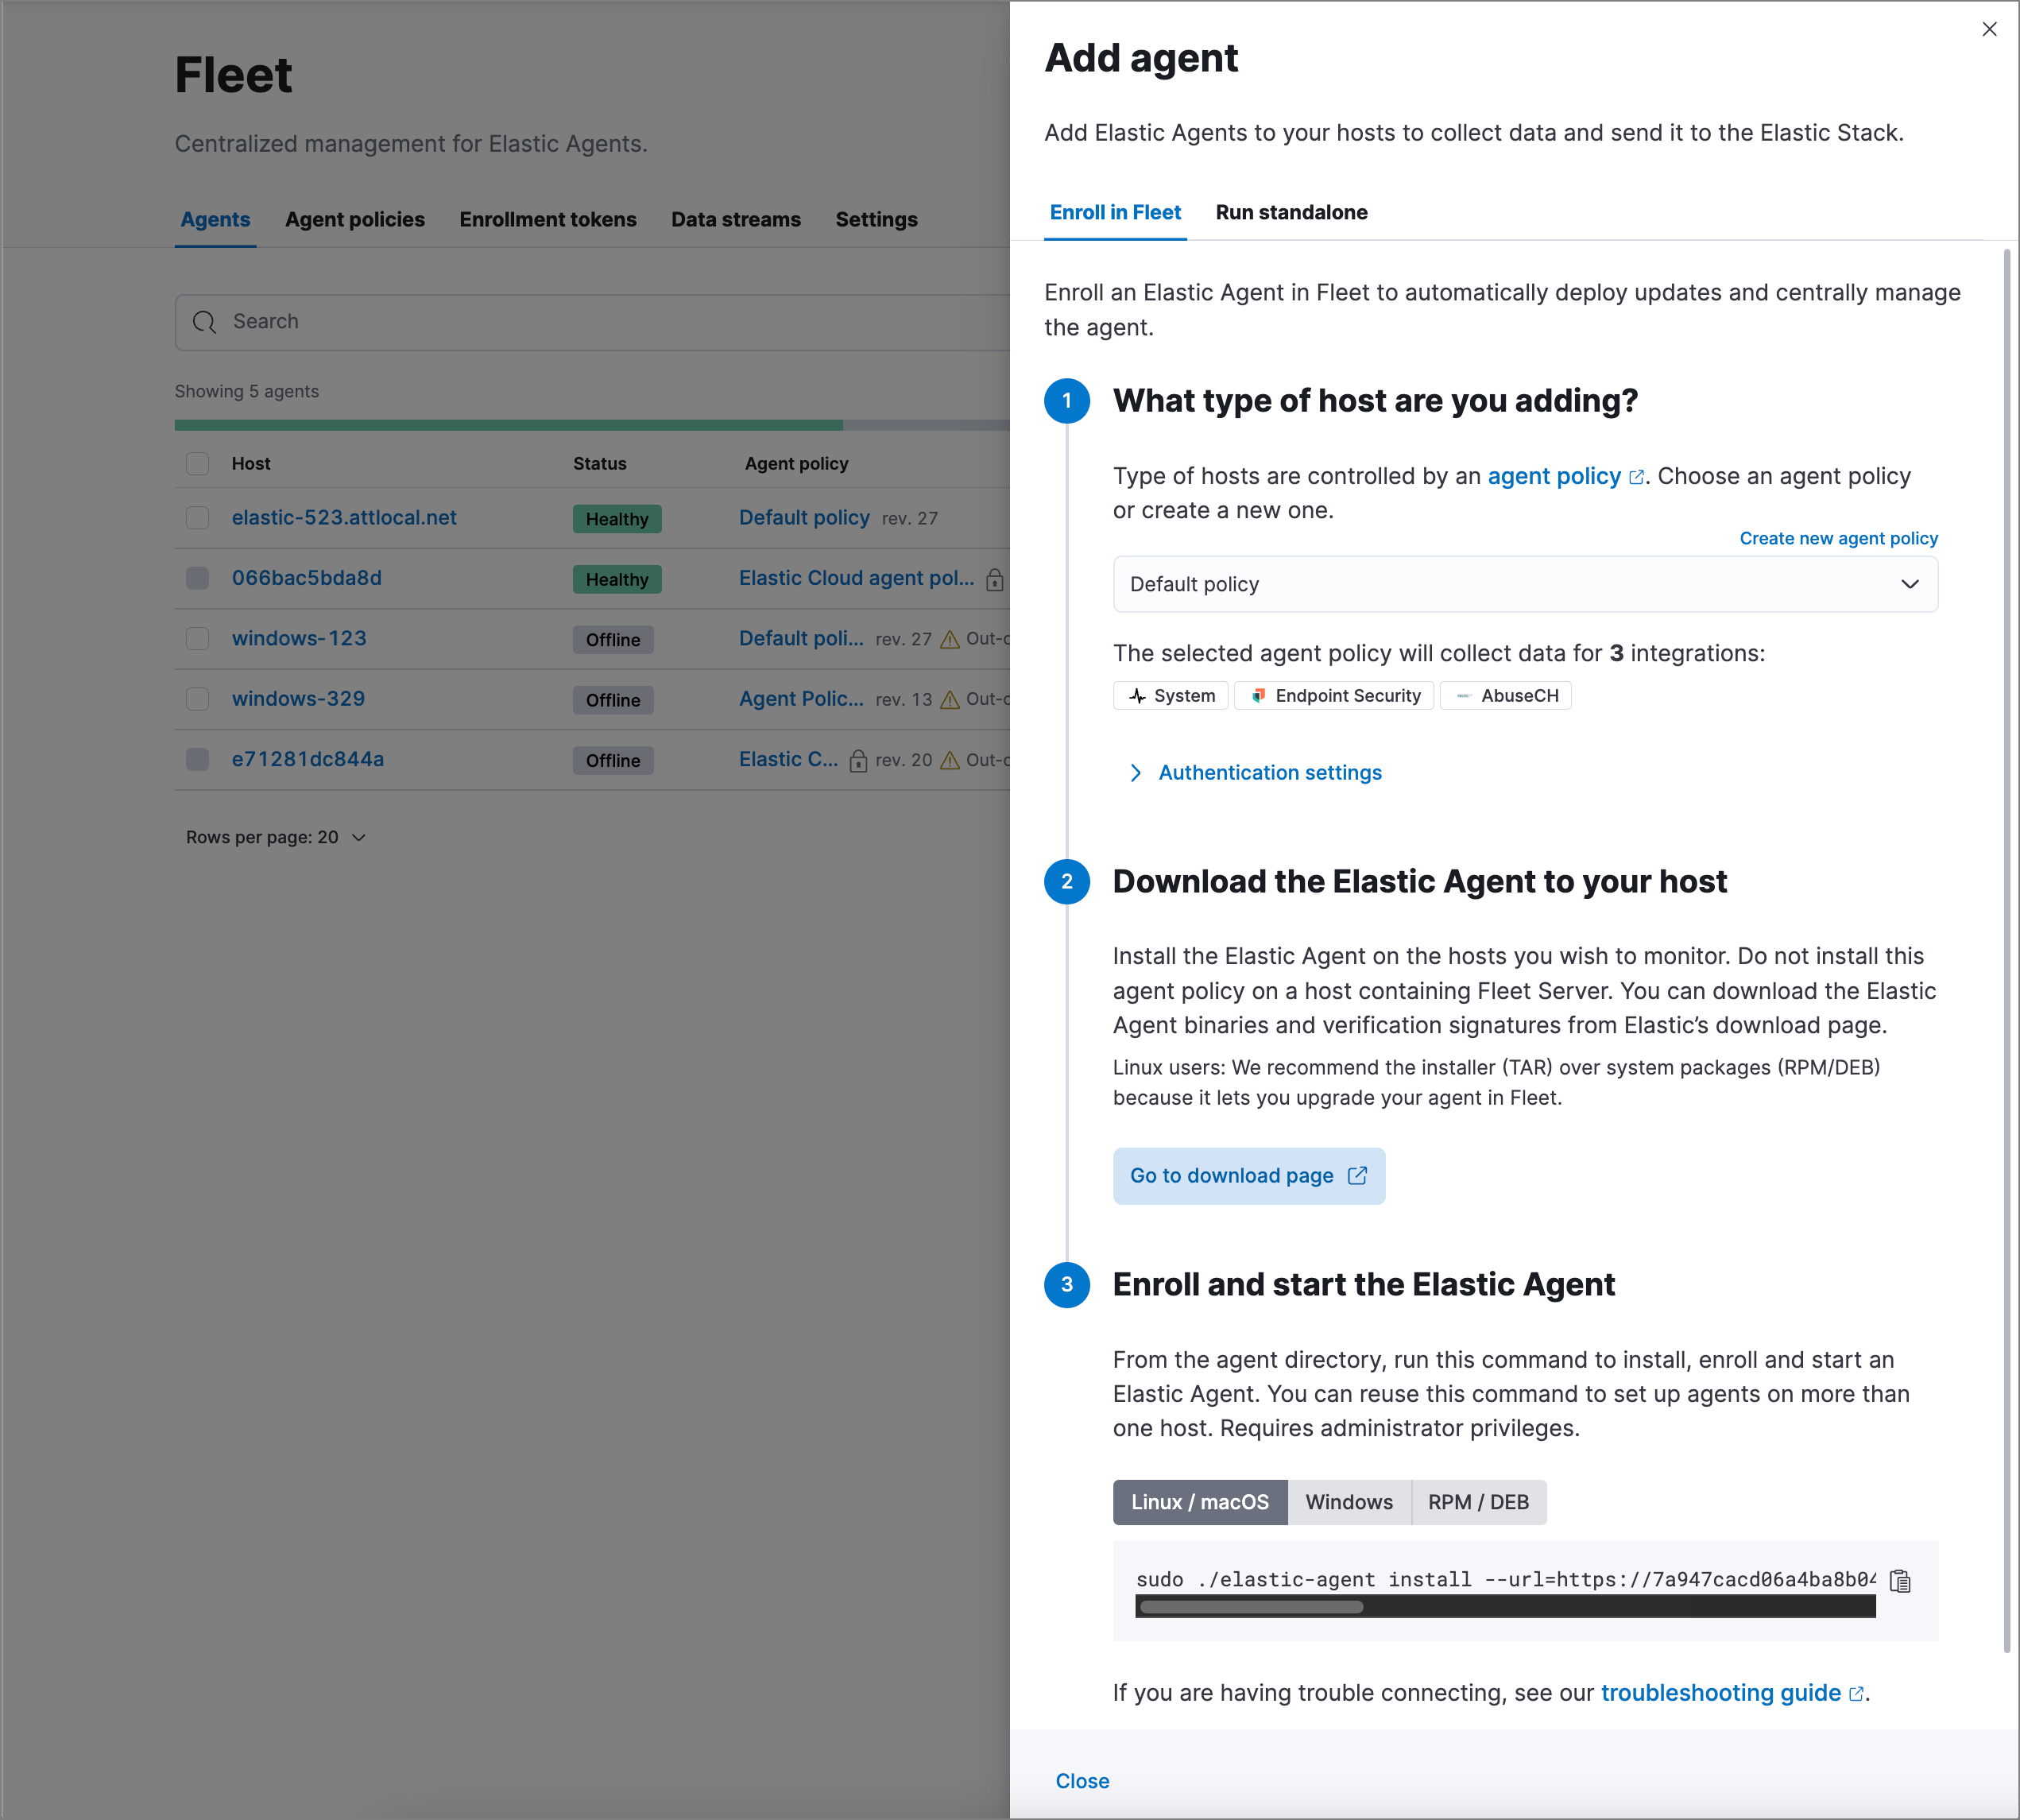 Add agent flyout on the Fleet page.